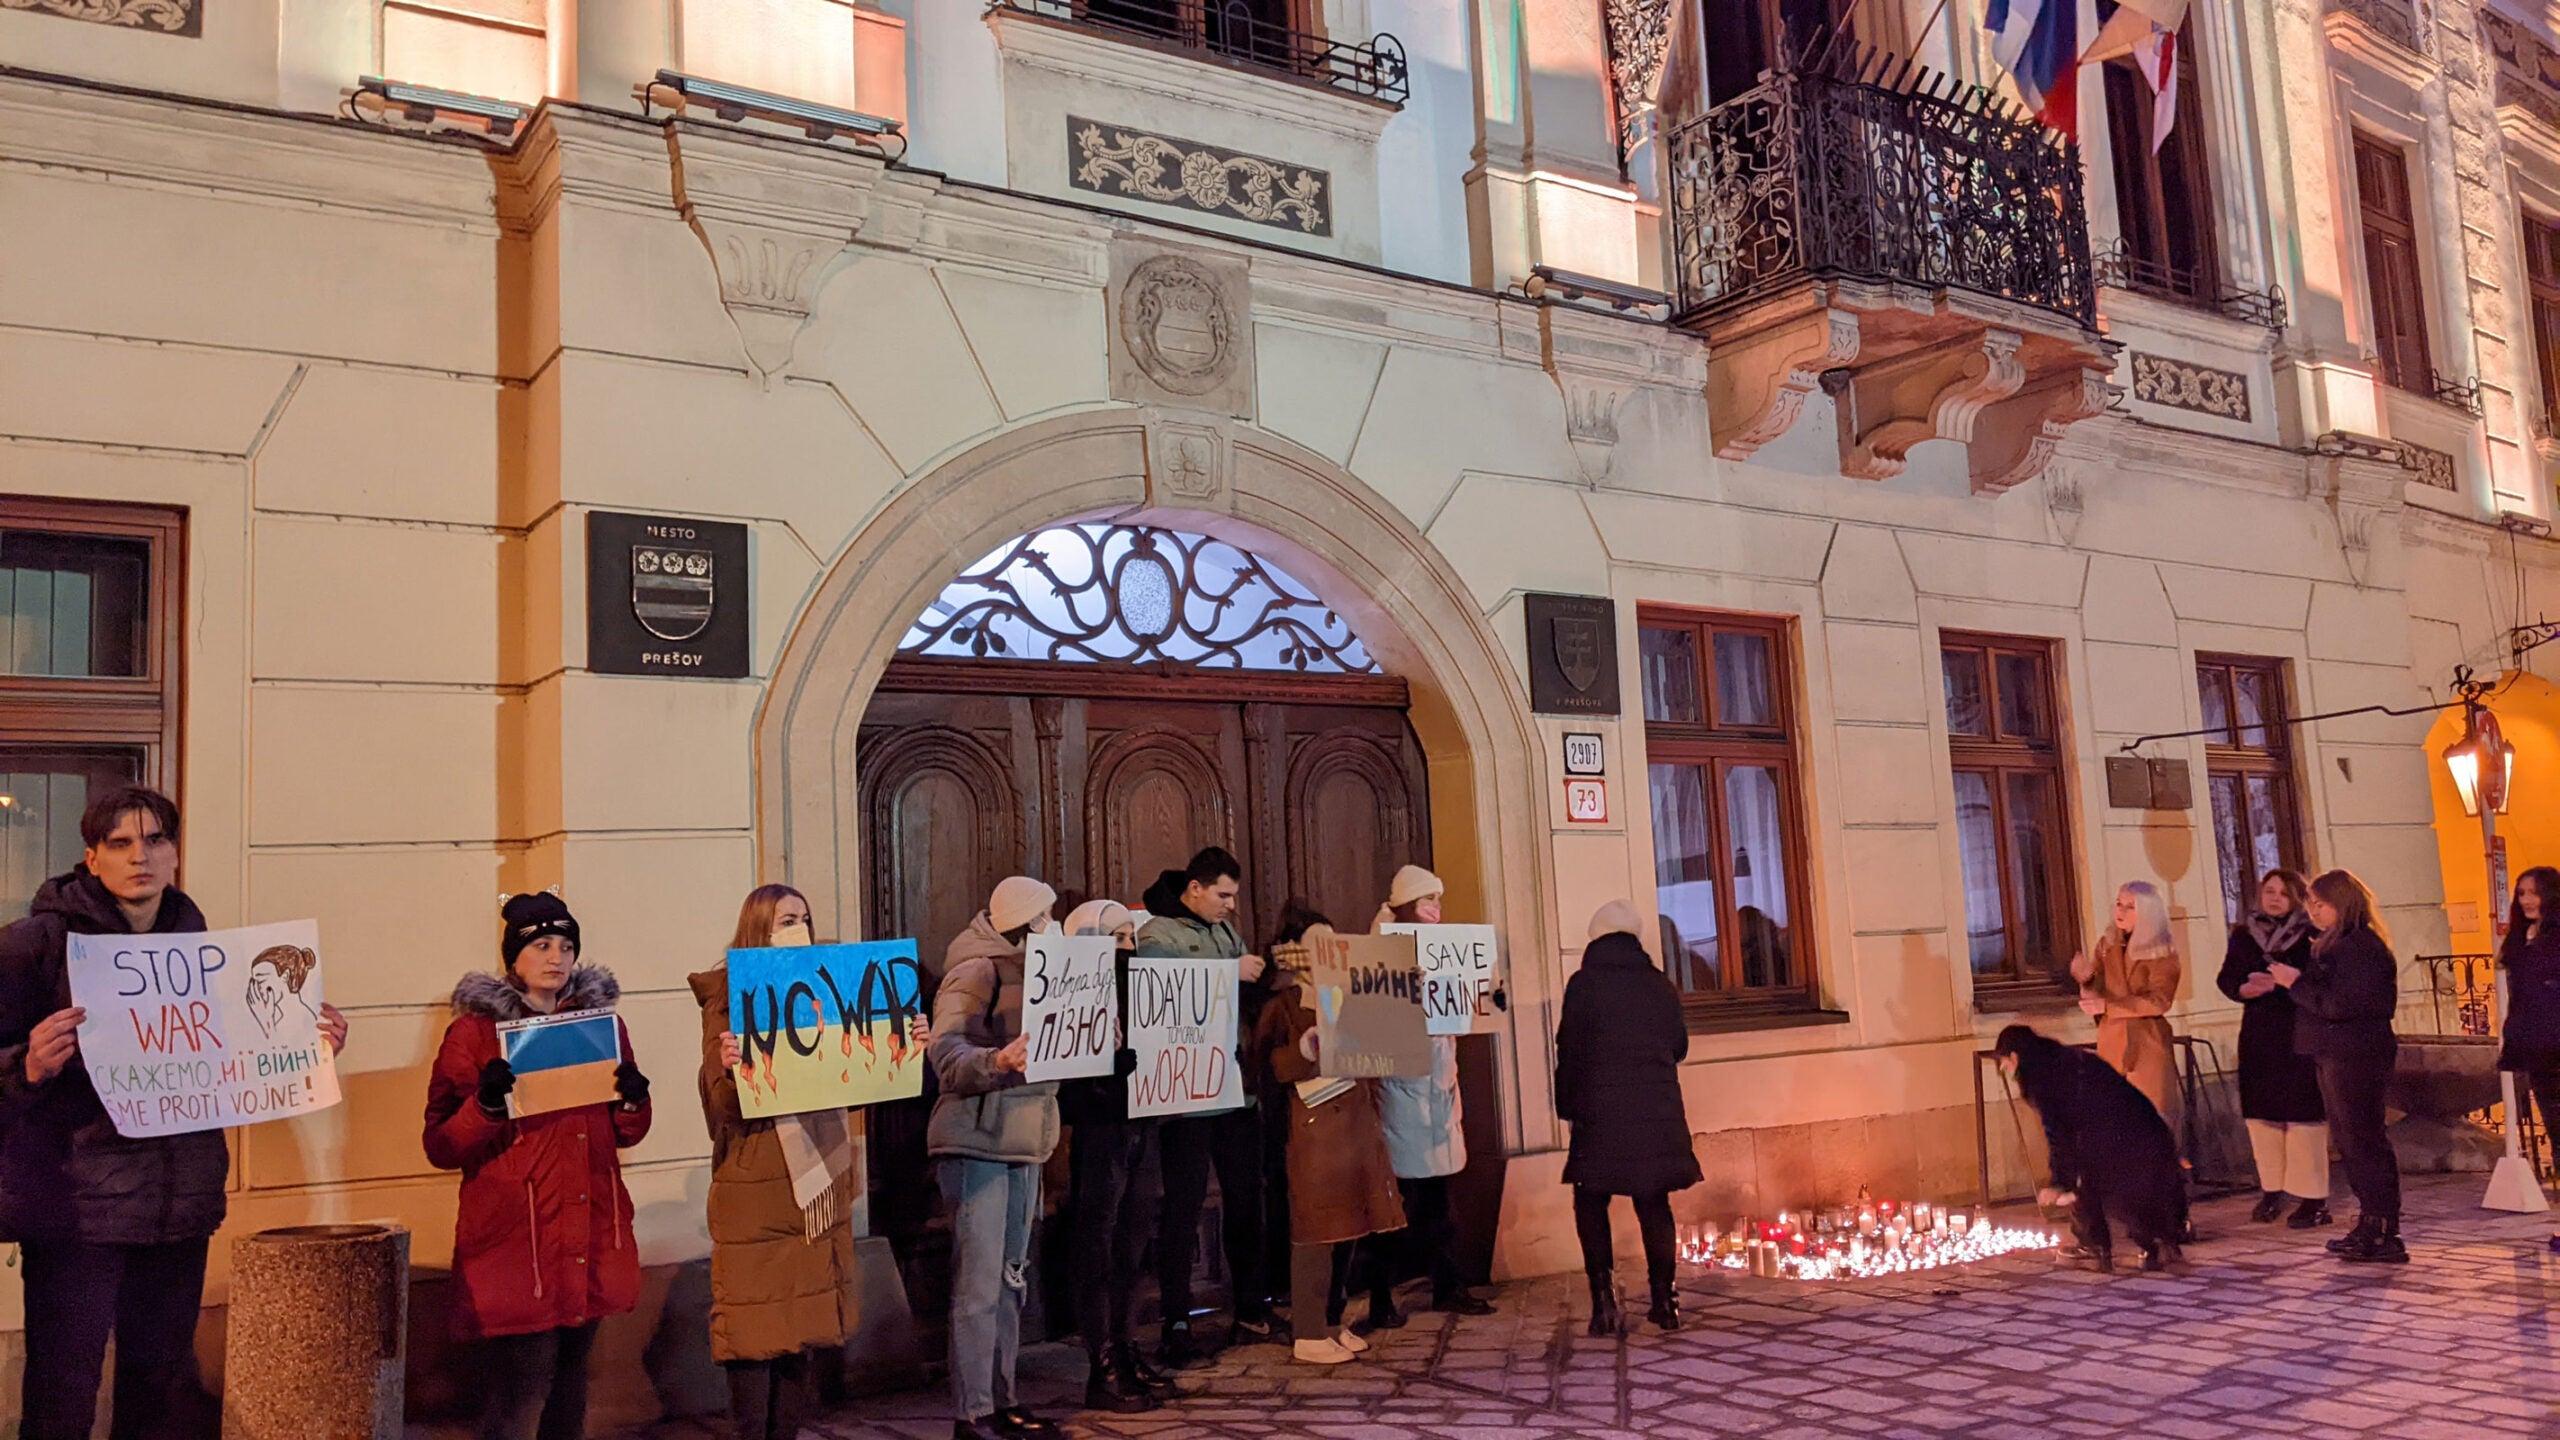 Anti-war vigil in front of City Hall in the Slovak city of Prešov, near the border with Ukraine